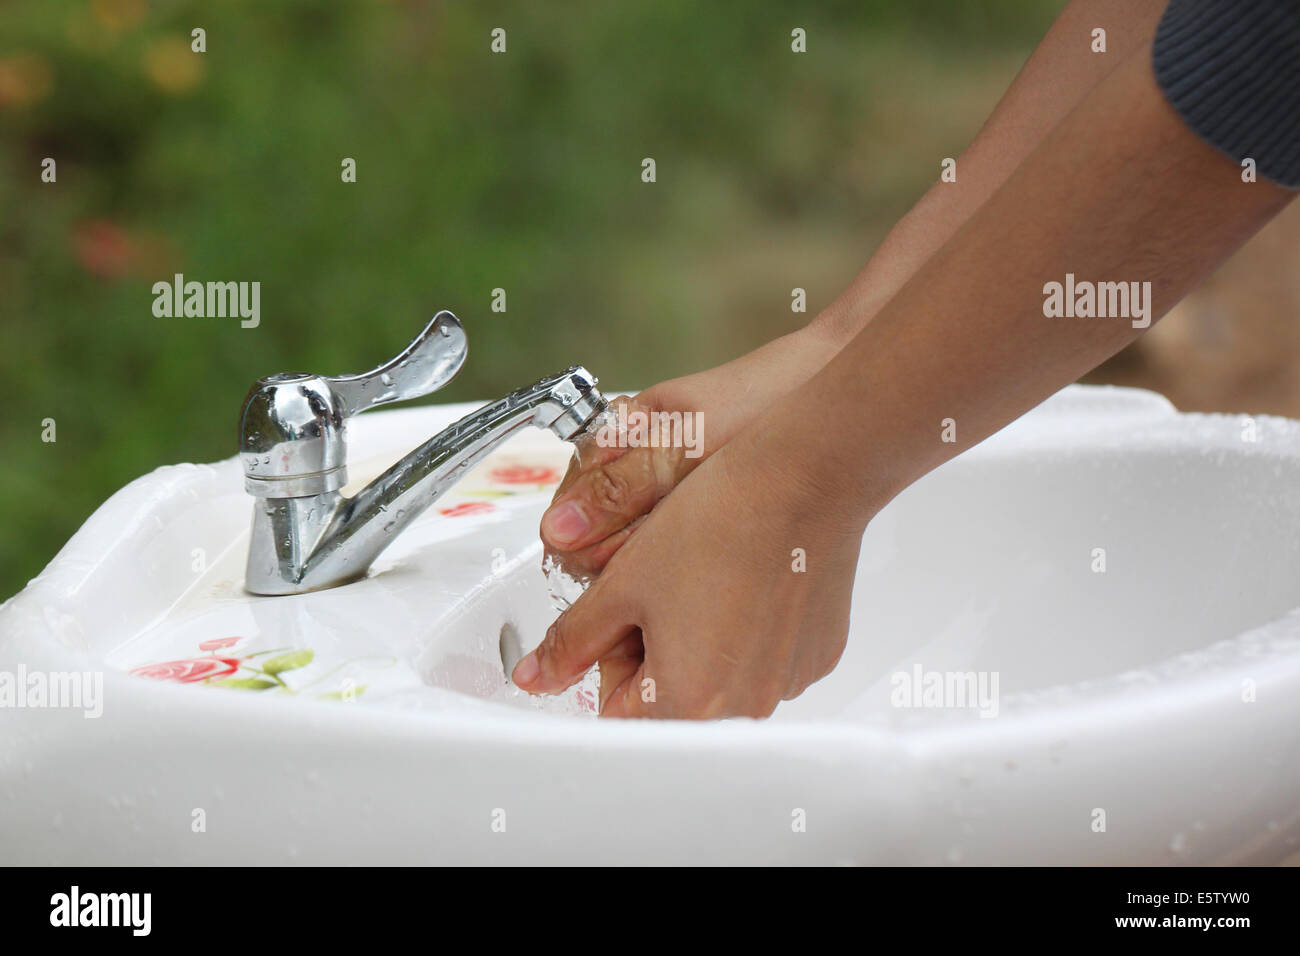 Women's hands are washed clean of faucets. Stock Photo